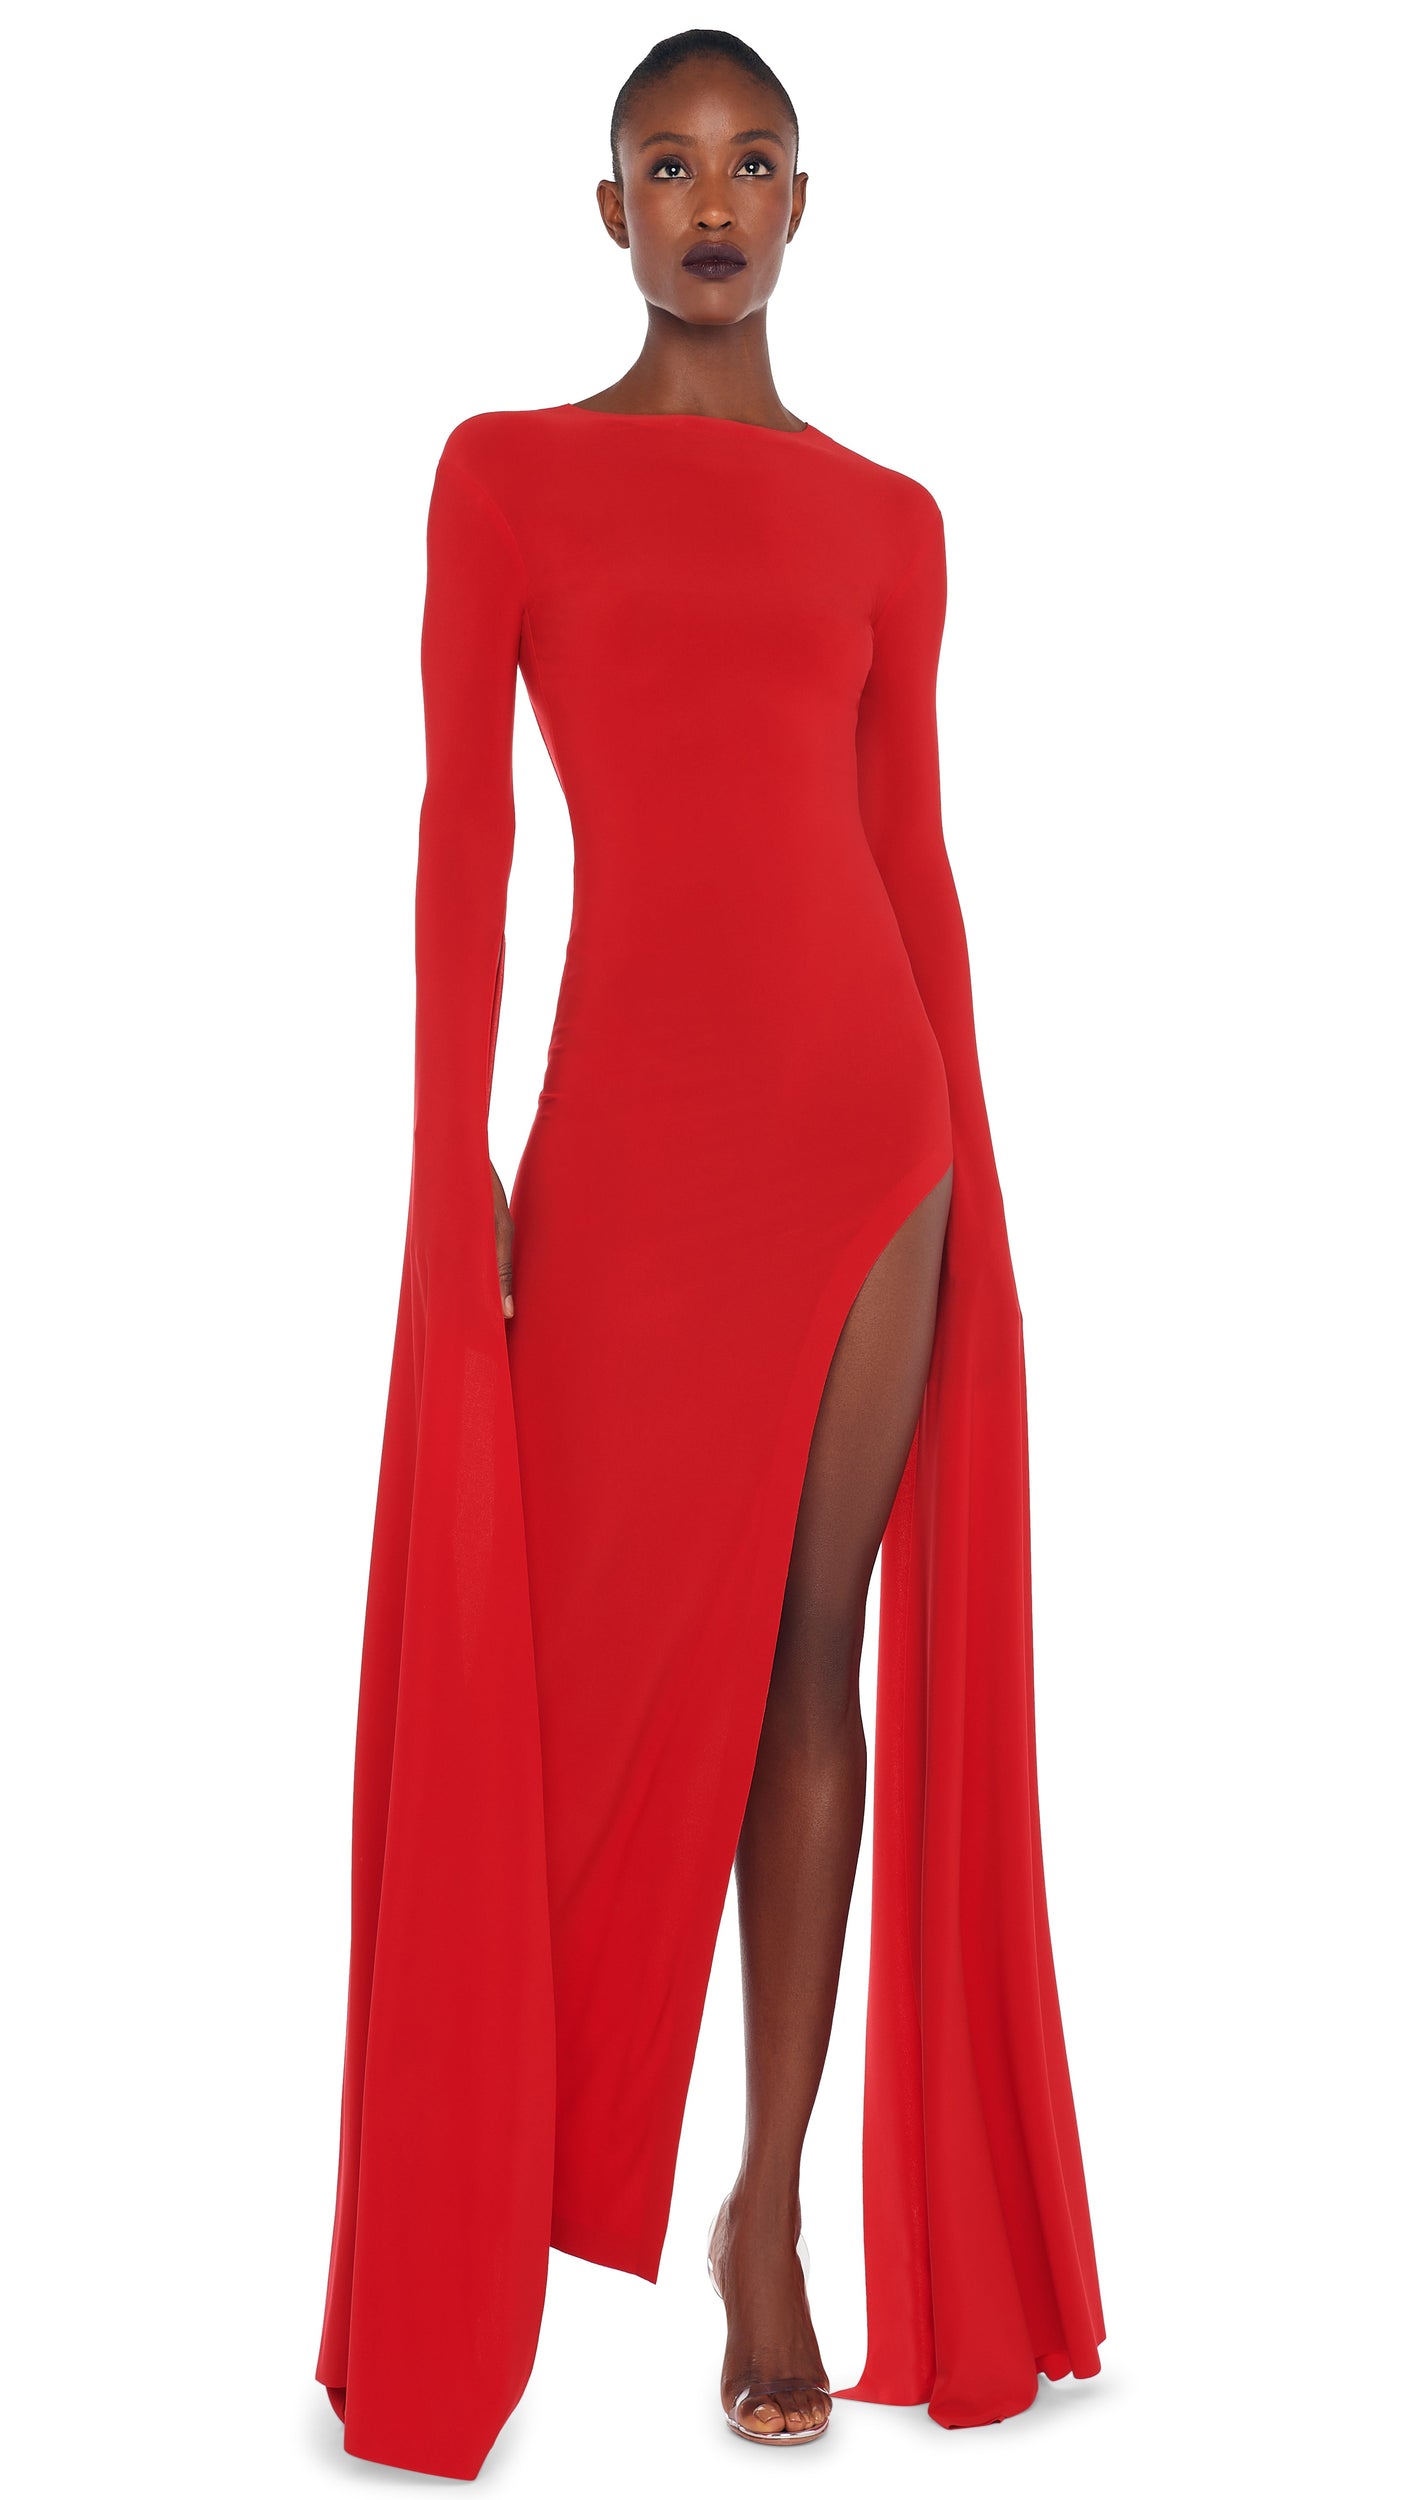 Buy TRENDY FAB Women's Rayon 3/4 Sleeve Gown Red at Amazon.in